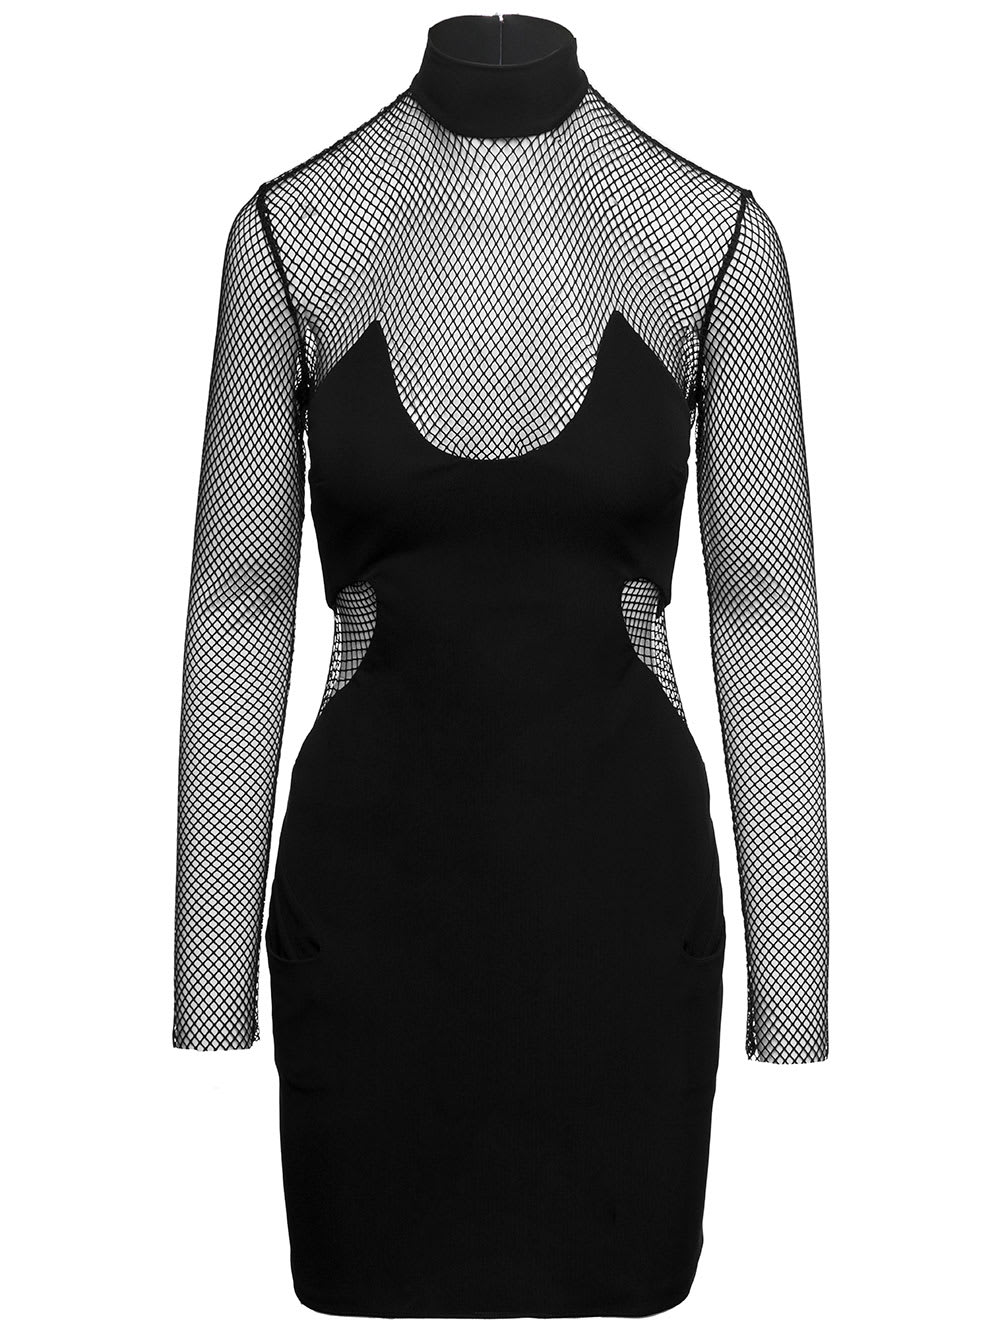 TOM FORD MINI BLACK DRESS WITH MESH INSERTS AND MOCK NECK IN VISCOSE WOMAN